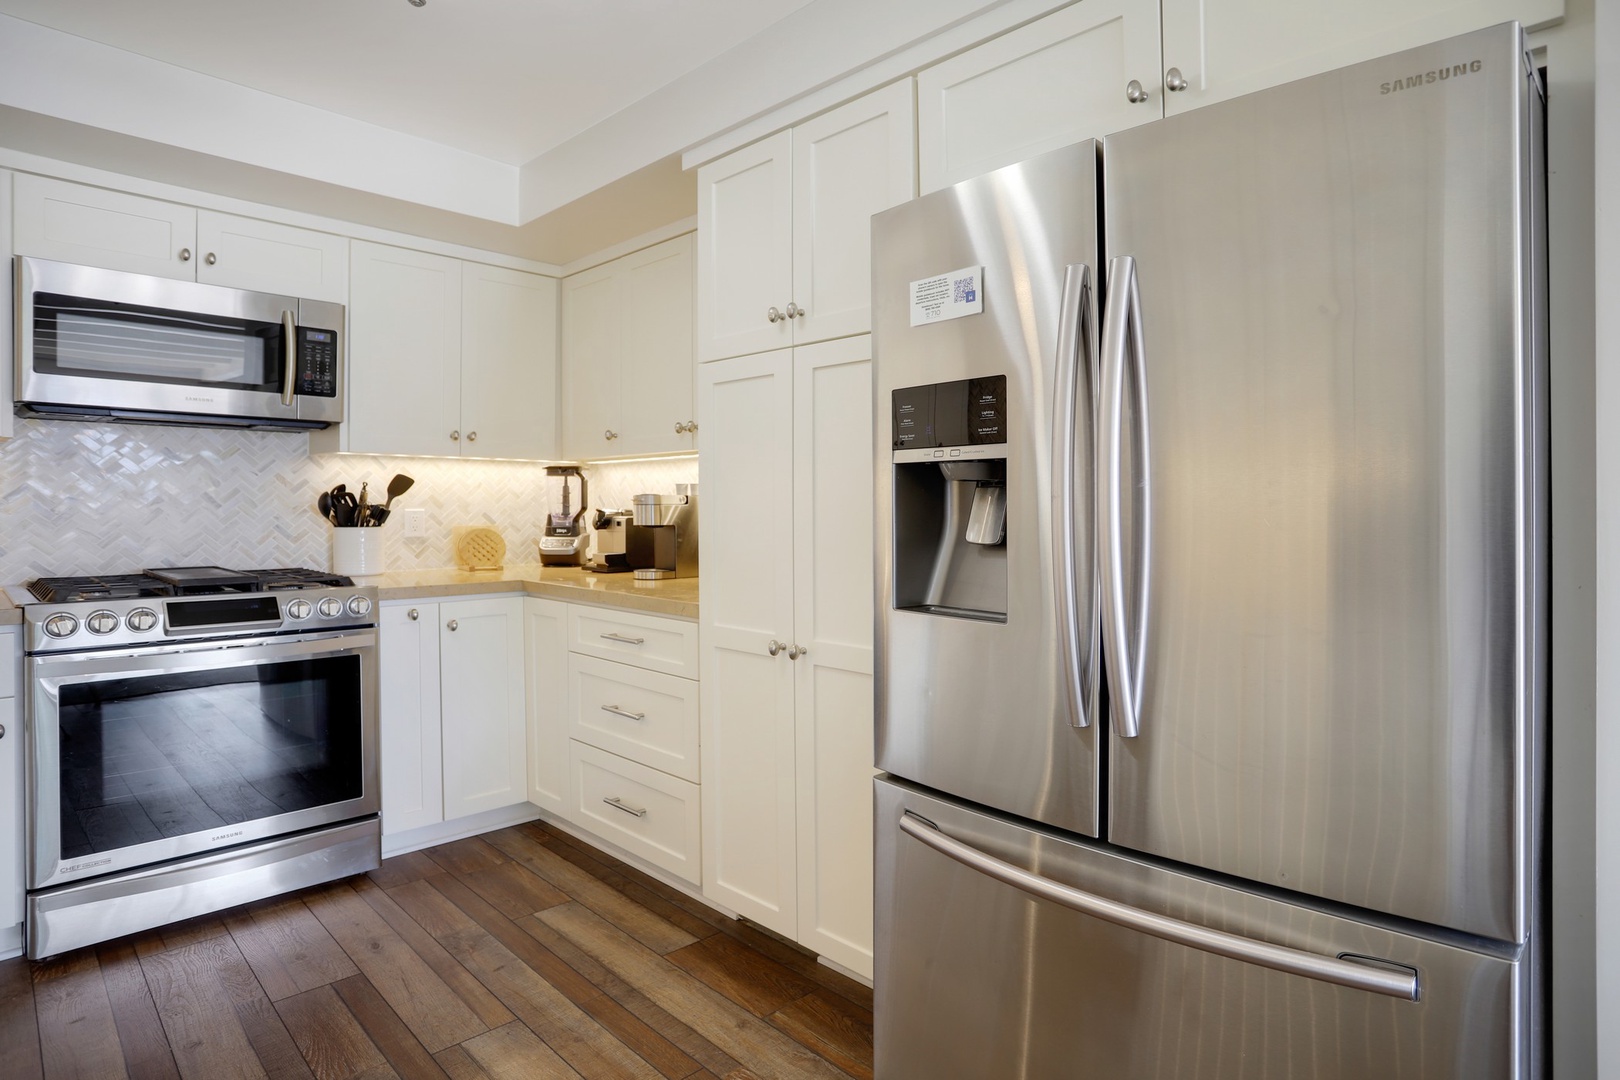 Stainless-steel appliances